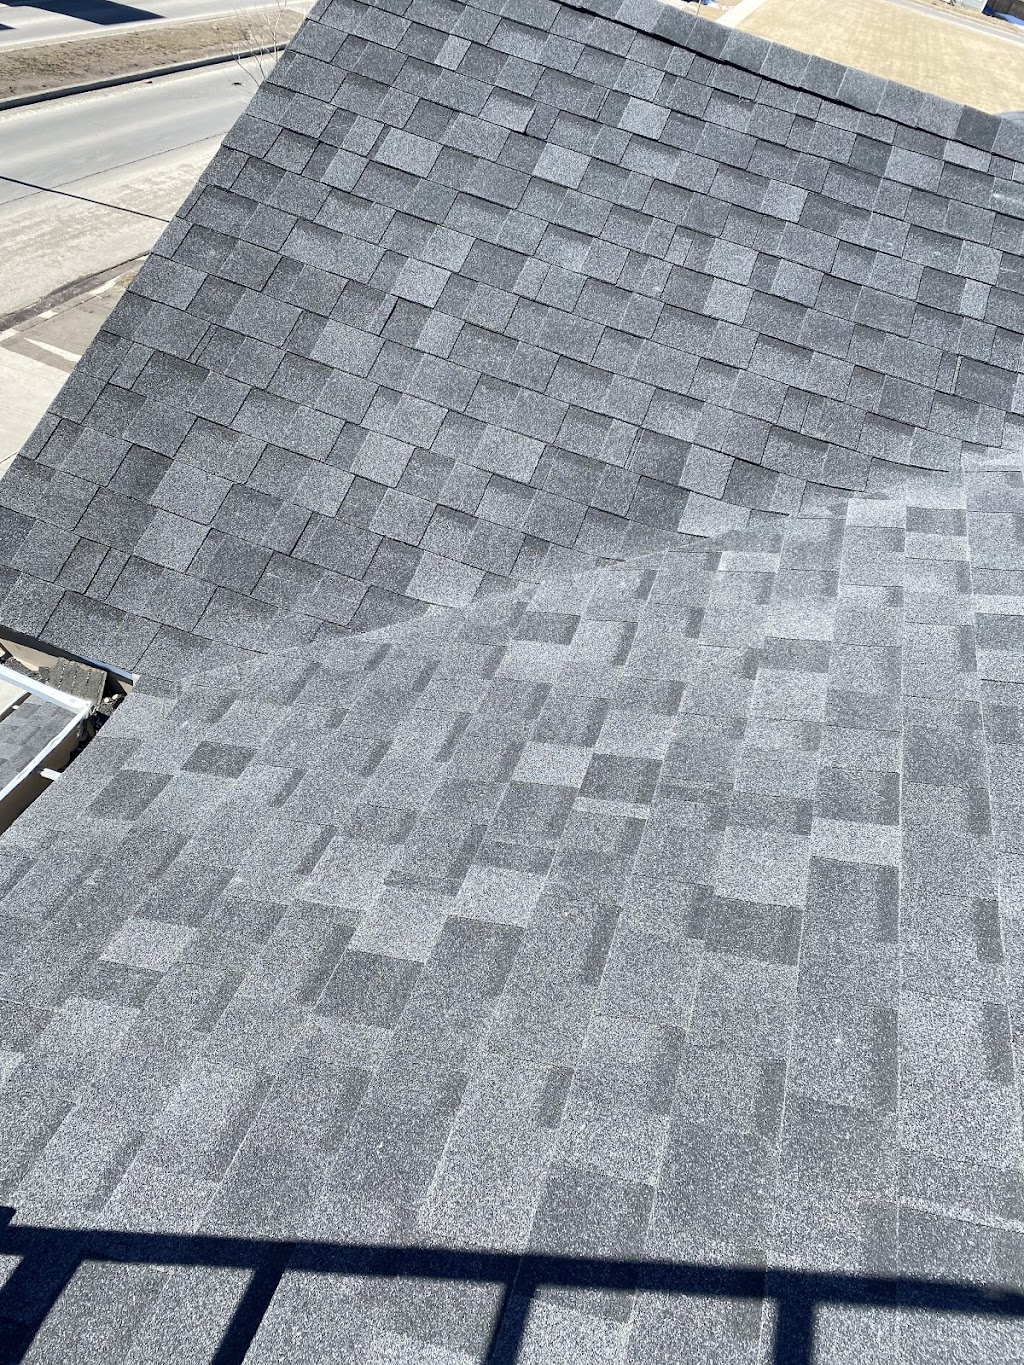 C Town Roofing Inc | roofing contractor | 224 Saddlecrest Way NE, Calgary, AB T3J 5N2, Canada | 5877030075 OR +1 587-703-0075